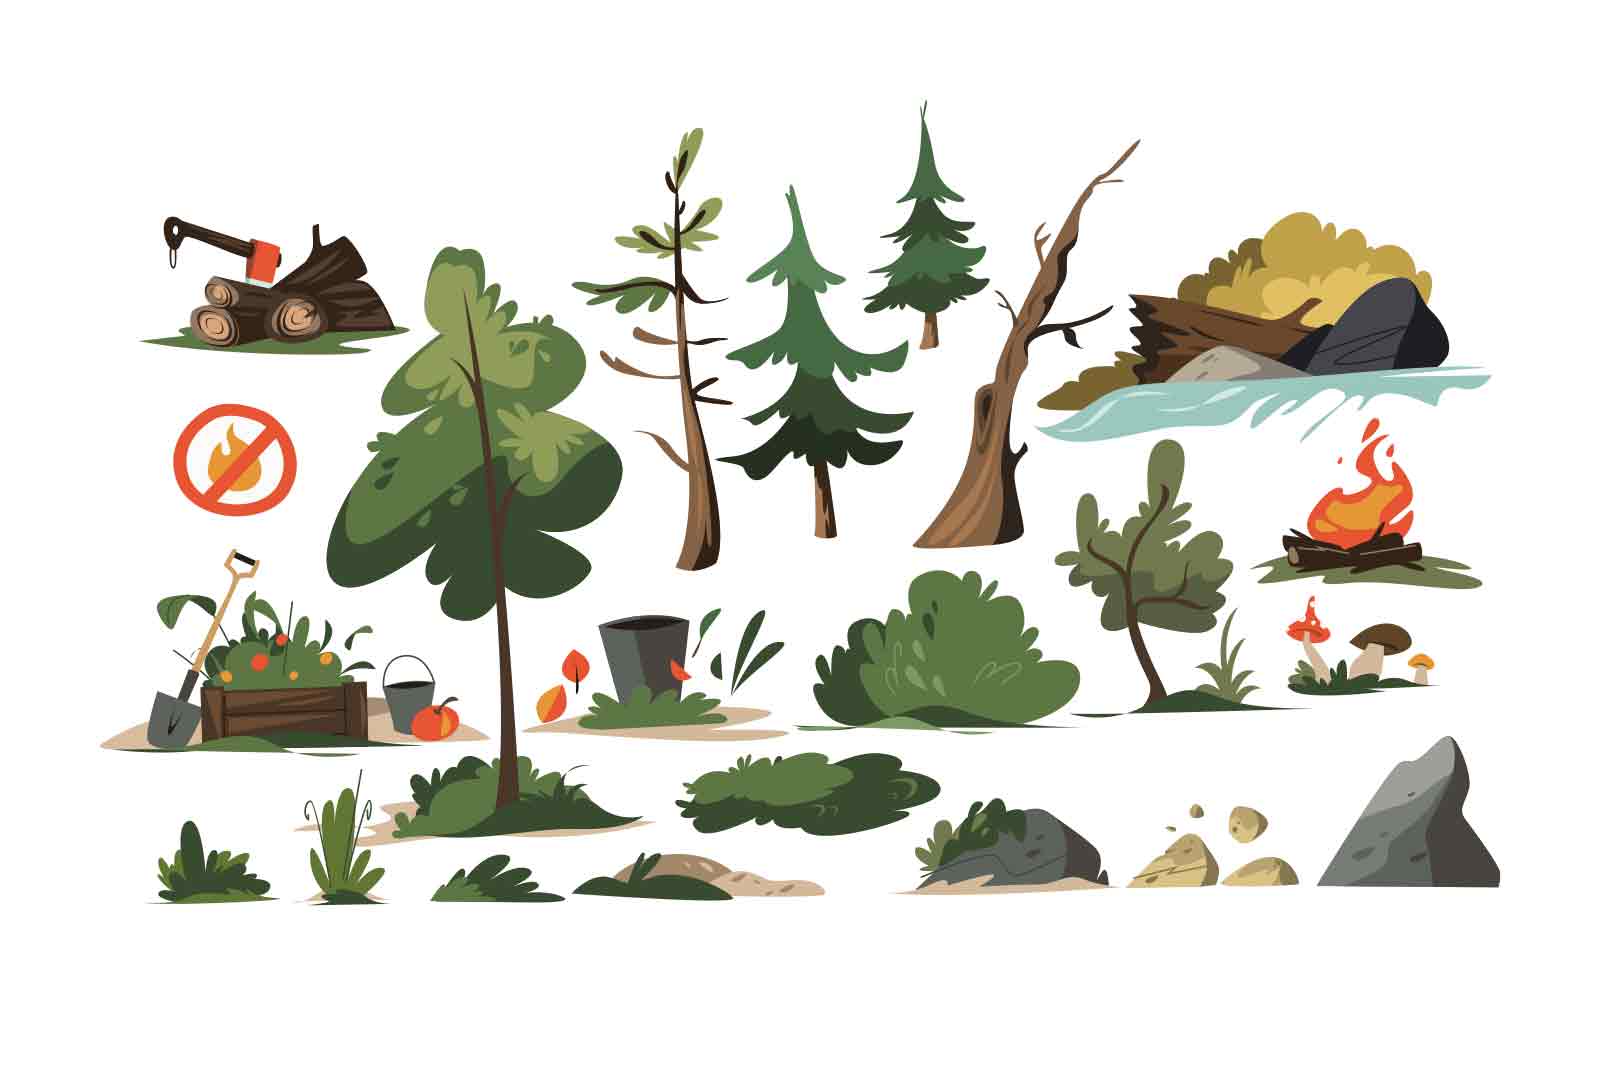 Forest nature with trees and stones set vector illustration. Trees, hedges, bush, mushrooms and apples flat style concept